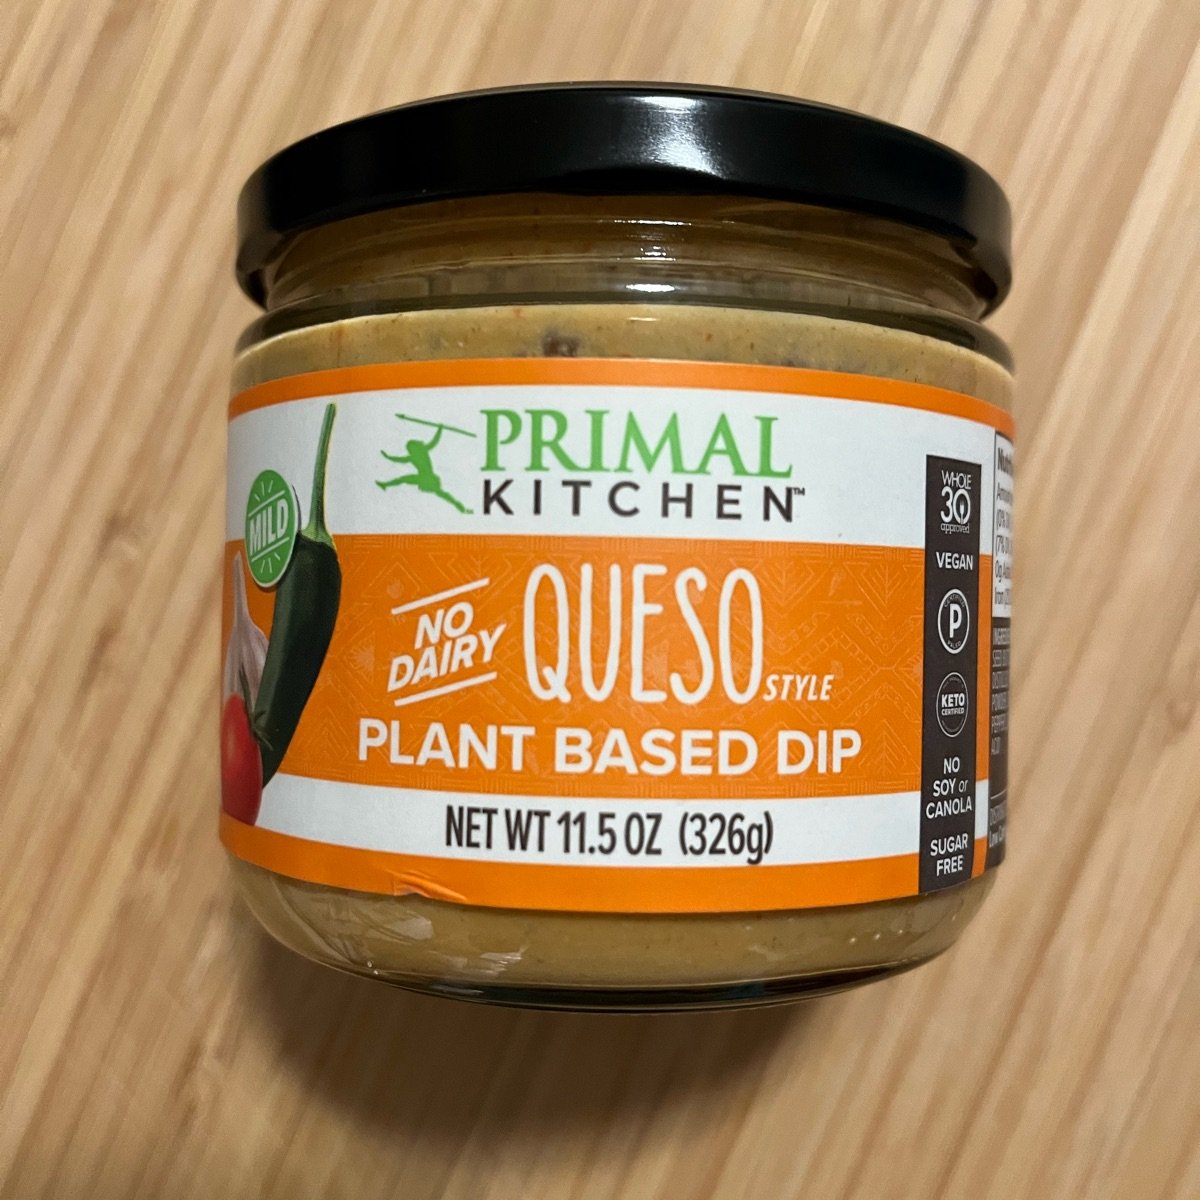 Primal Kitchen Plant Based Dip, No Dairy, Queso Style, Mild - 11.5 oz